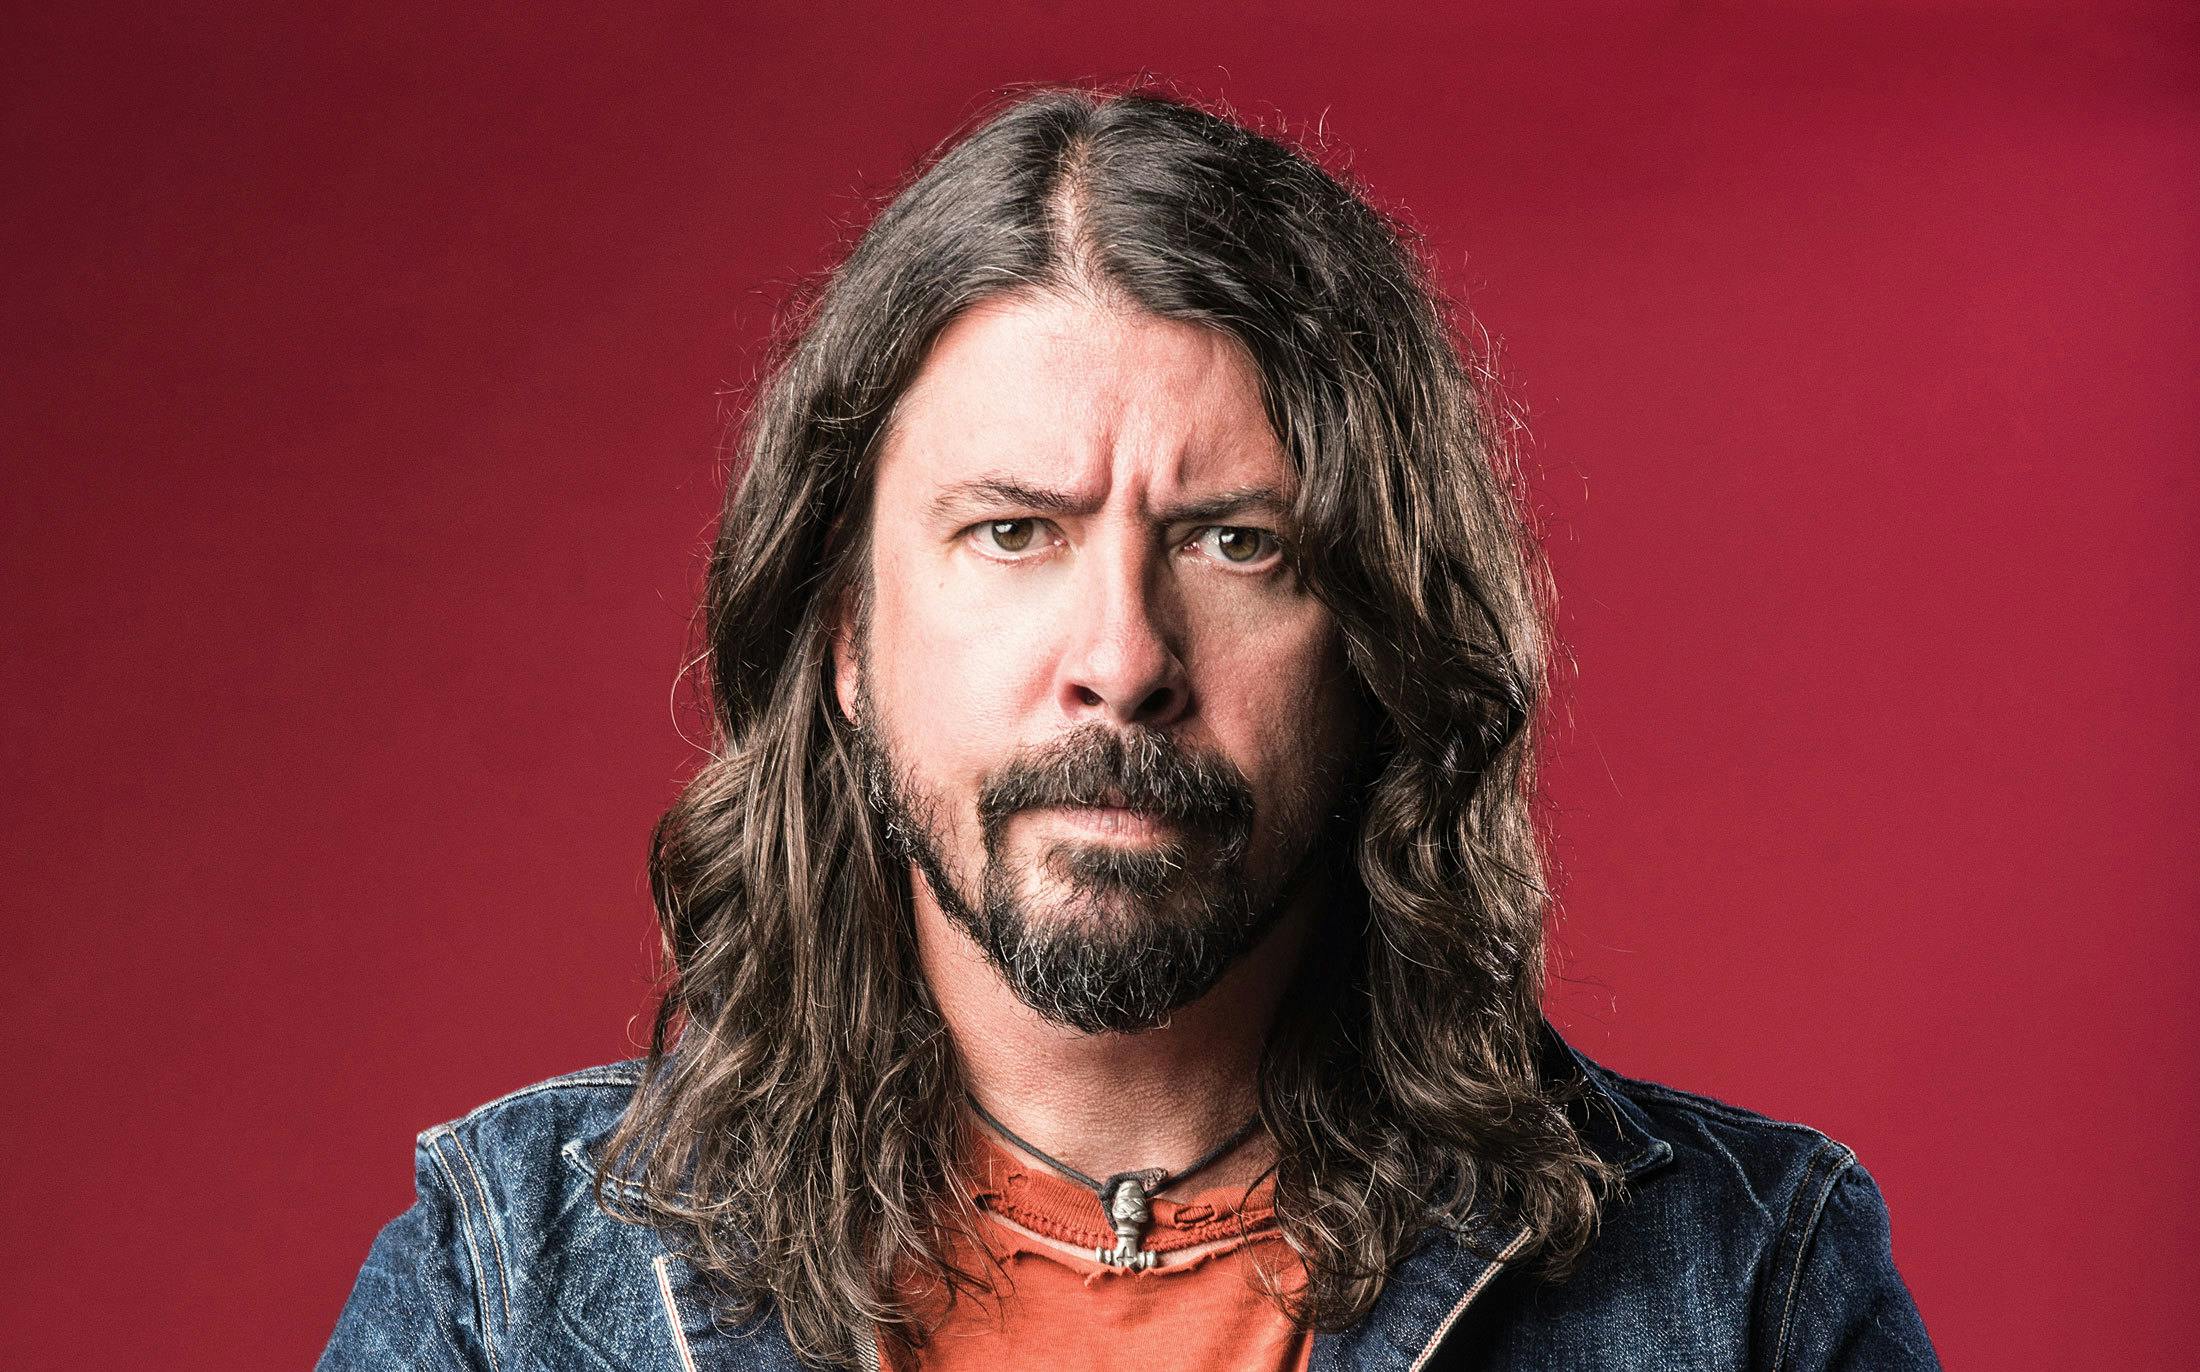 Dave Grohl would drum with ABBA: "I'm such a big fan"